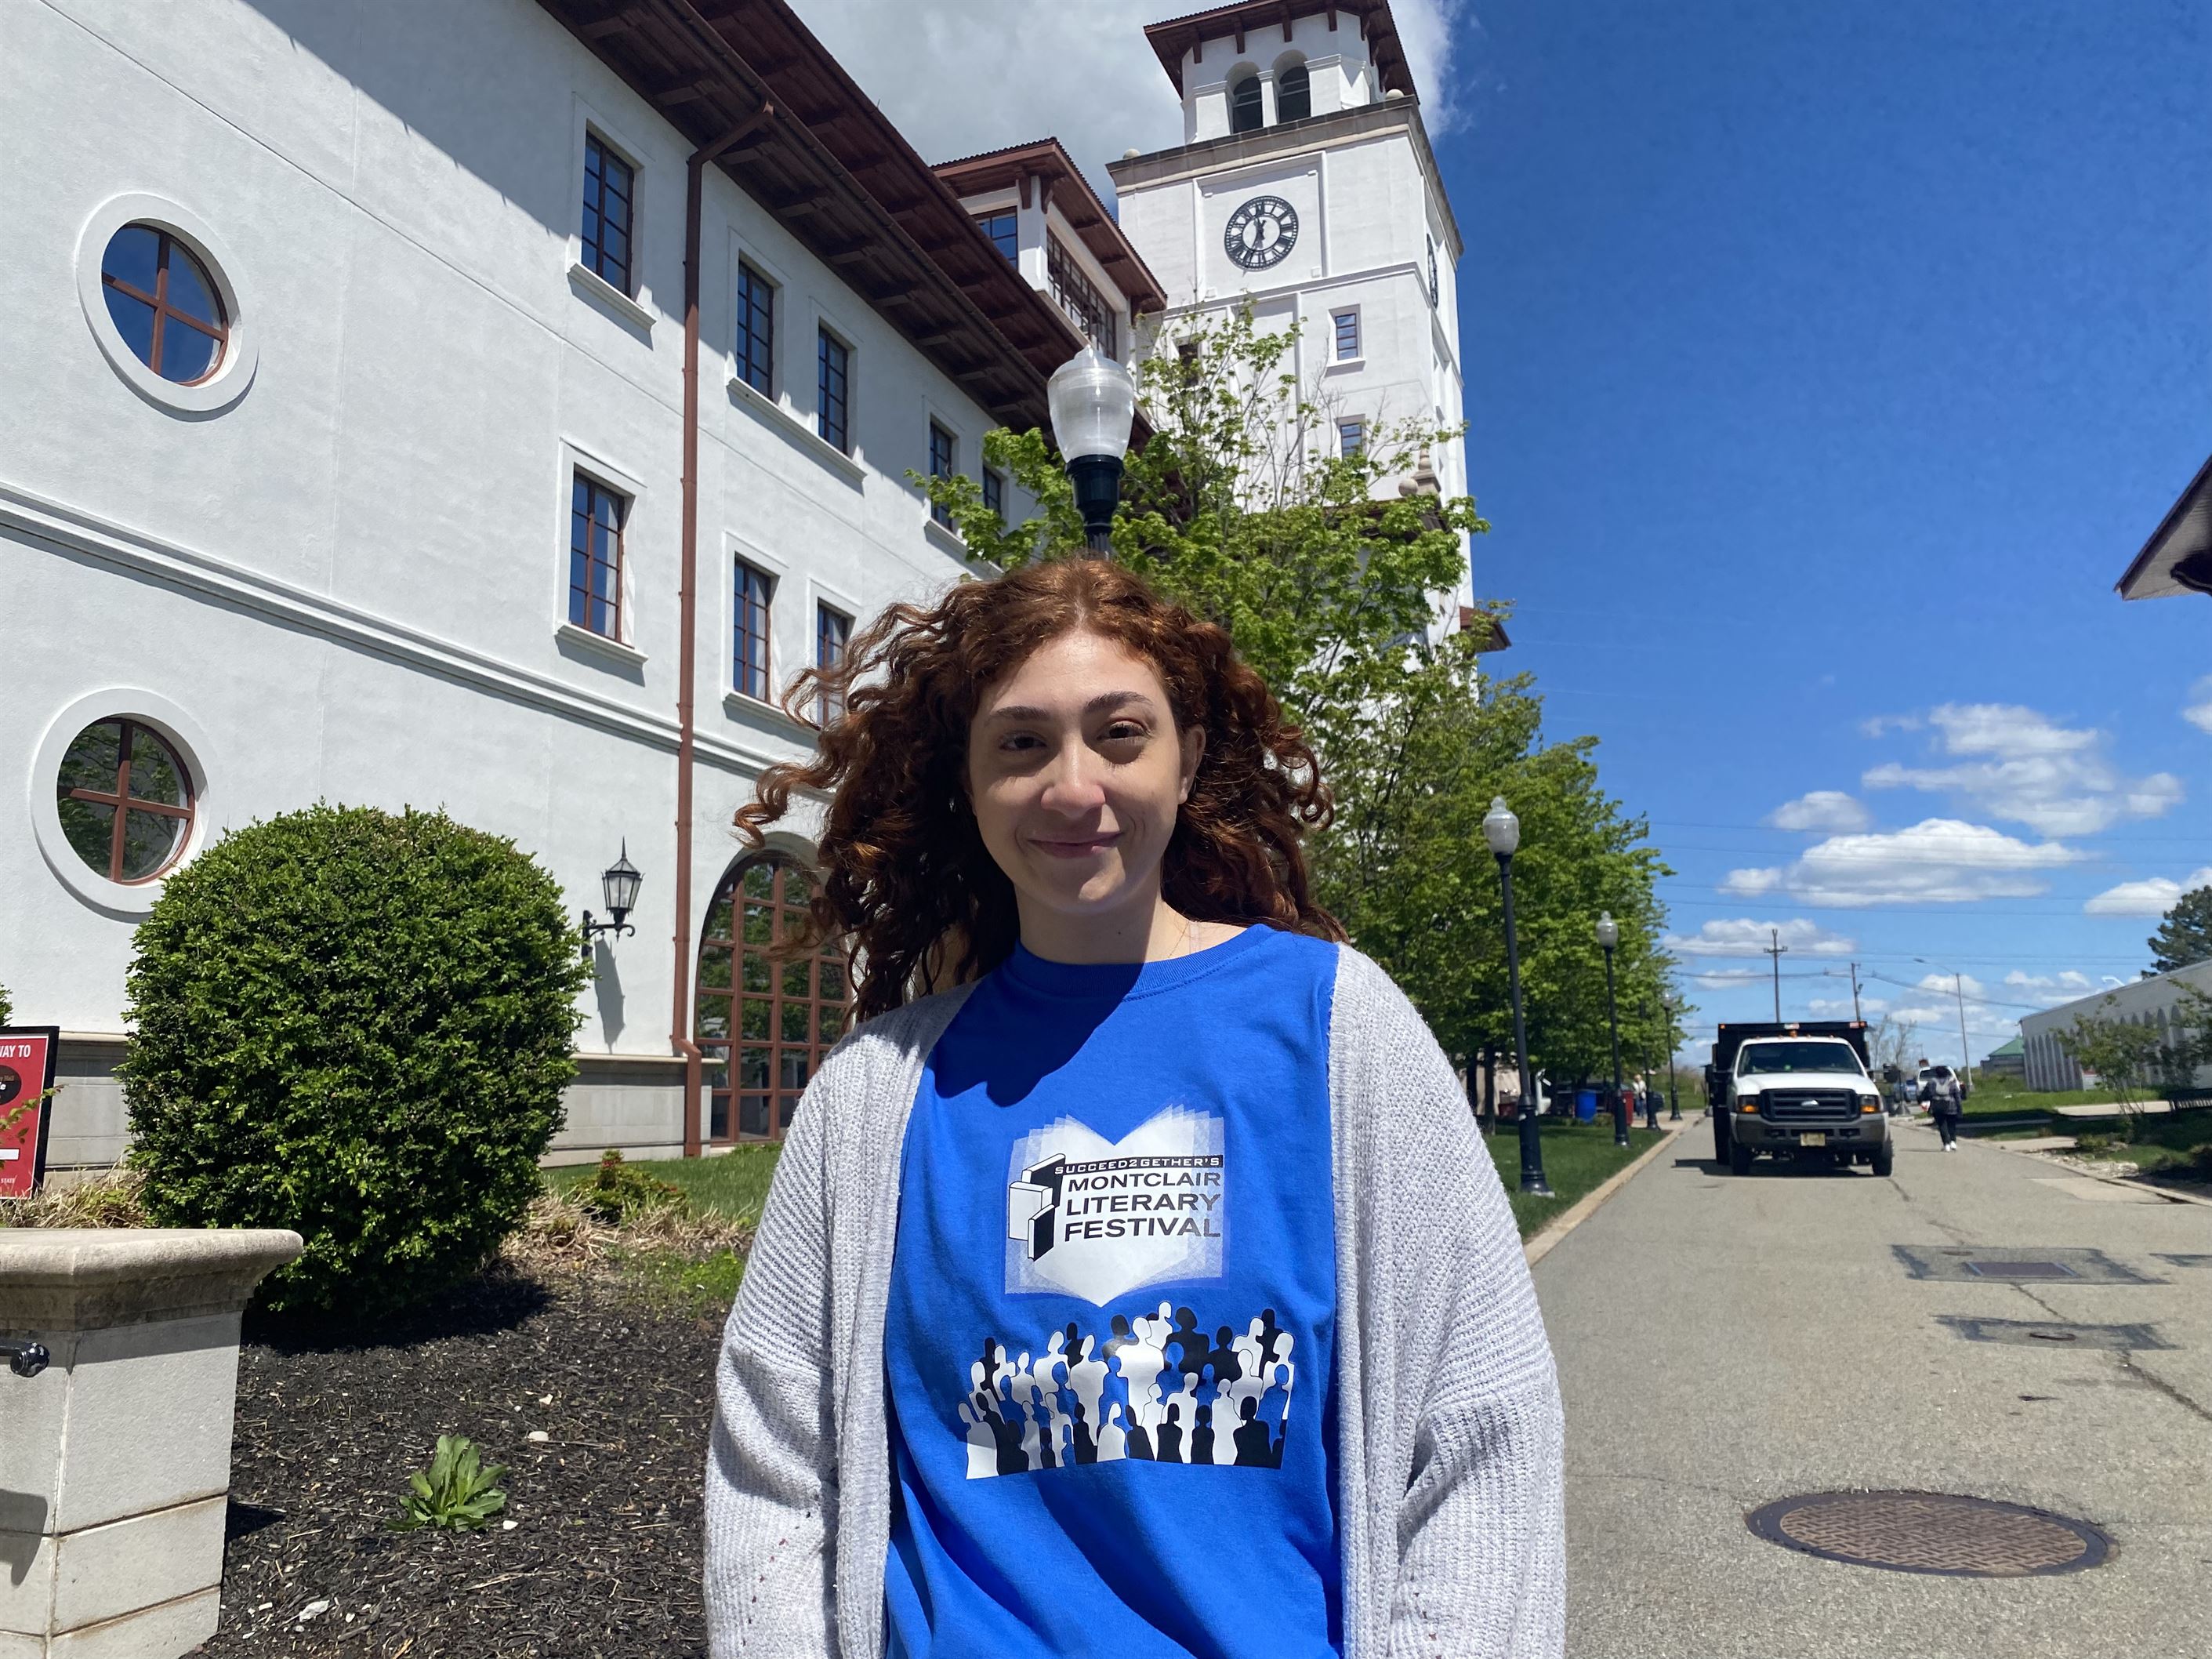 Alyssa Roberts, an English graduate student, enjoyed connecting with the authors and other attendees at the festival.
Olivia Yayla | The Montclarion